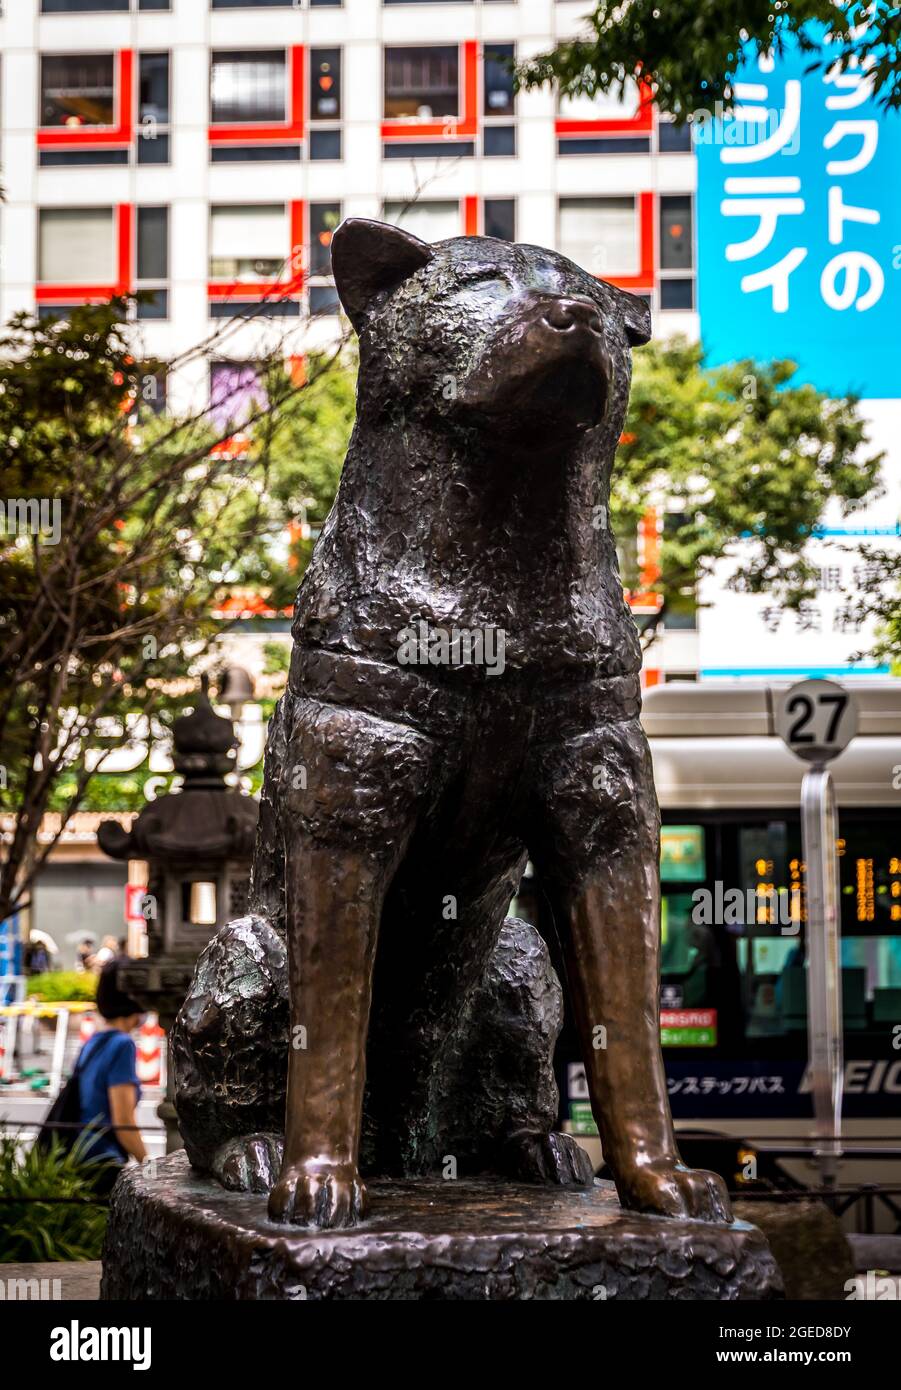 Hachiko an Akita dog memorialised outside Shibuya station during he 1920s where he waited daily for his master who had passed away some time before. Stock Photo